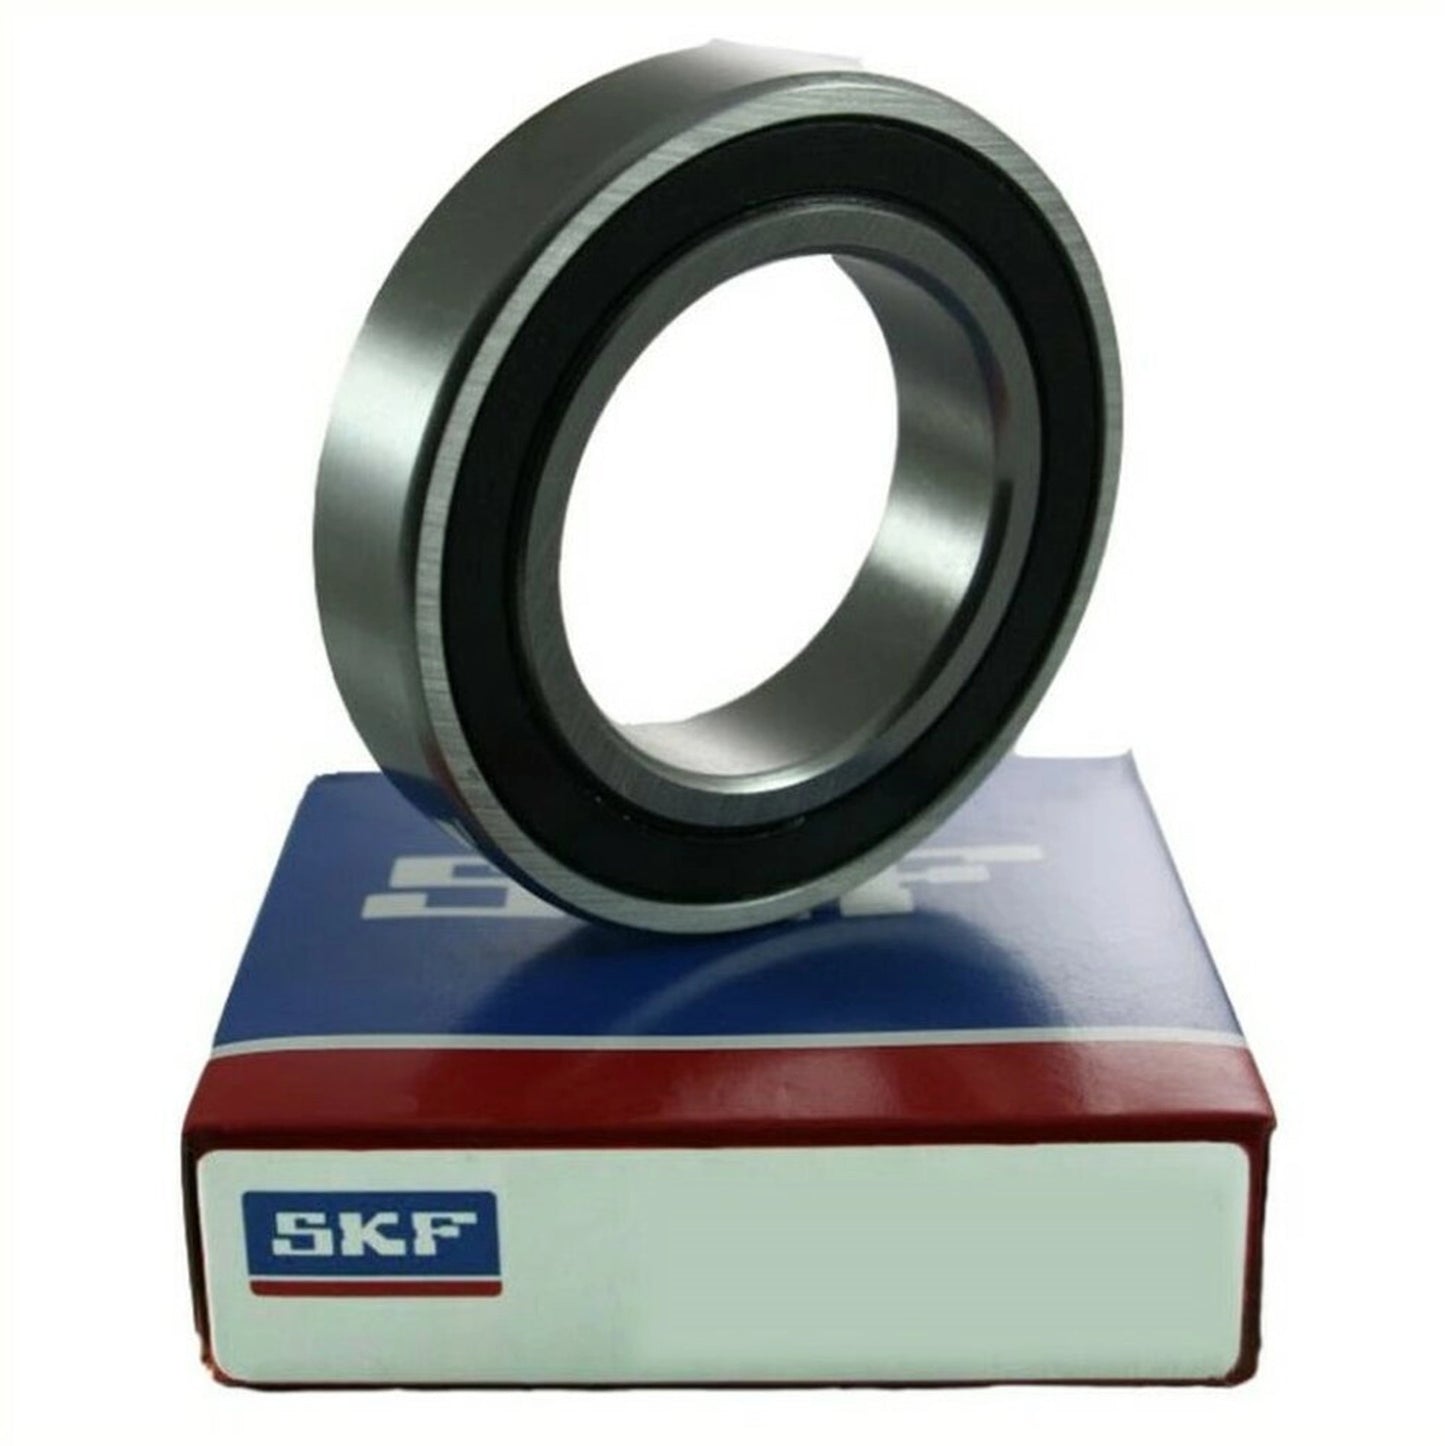 Lager 6309-2RS1 / C3 45x100x25 SKF